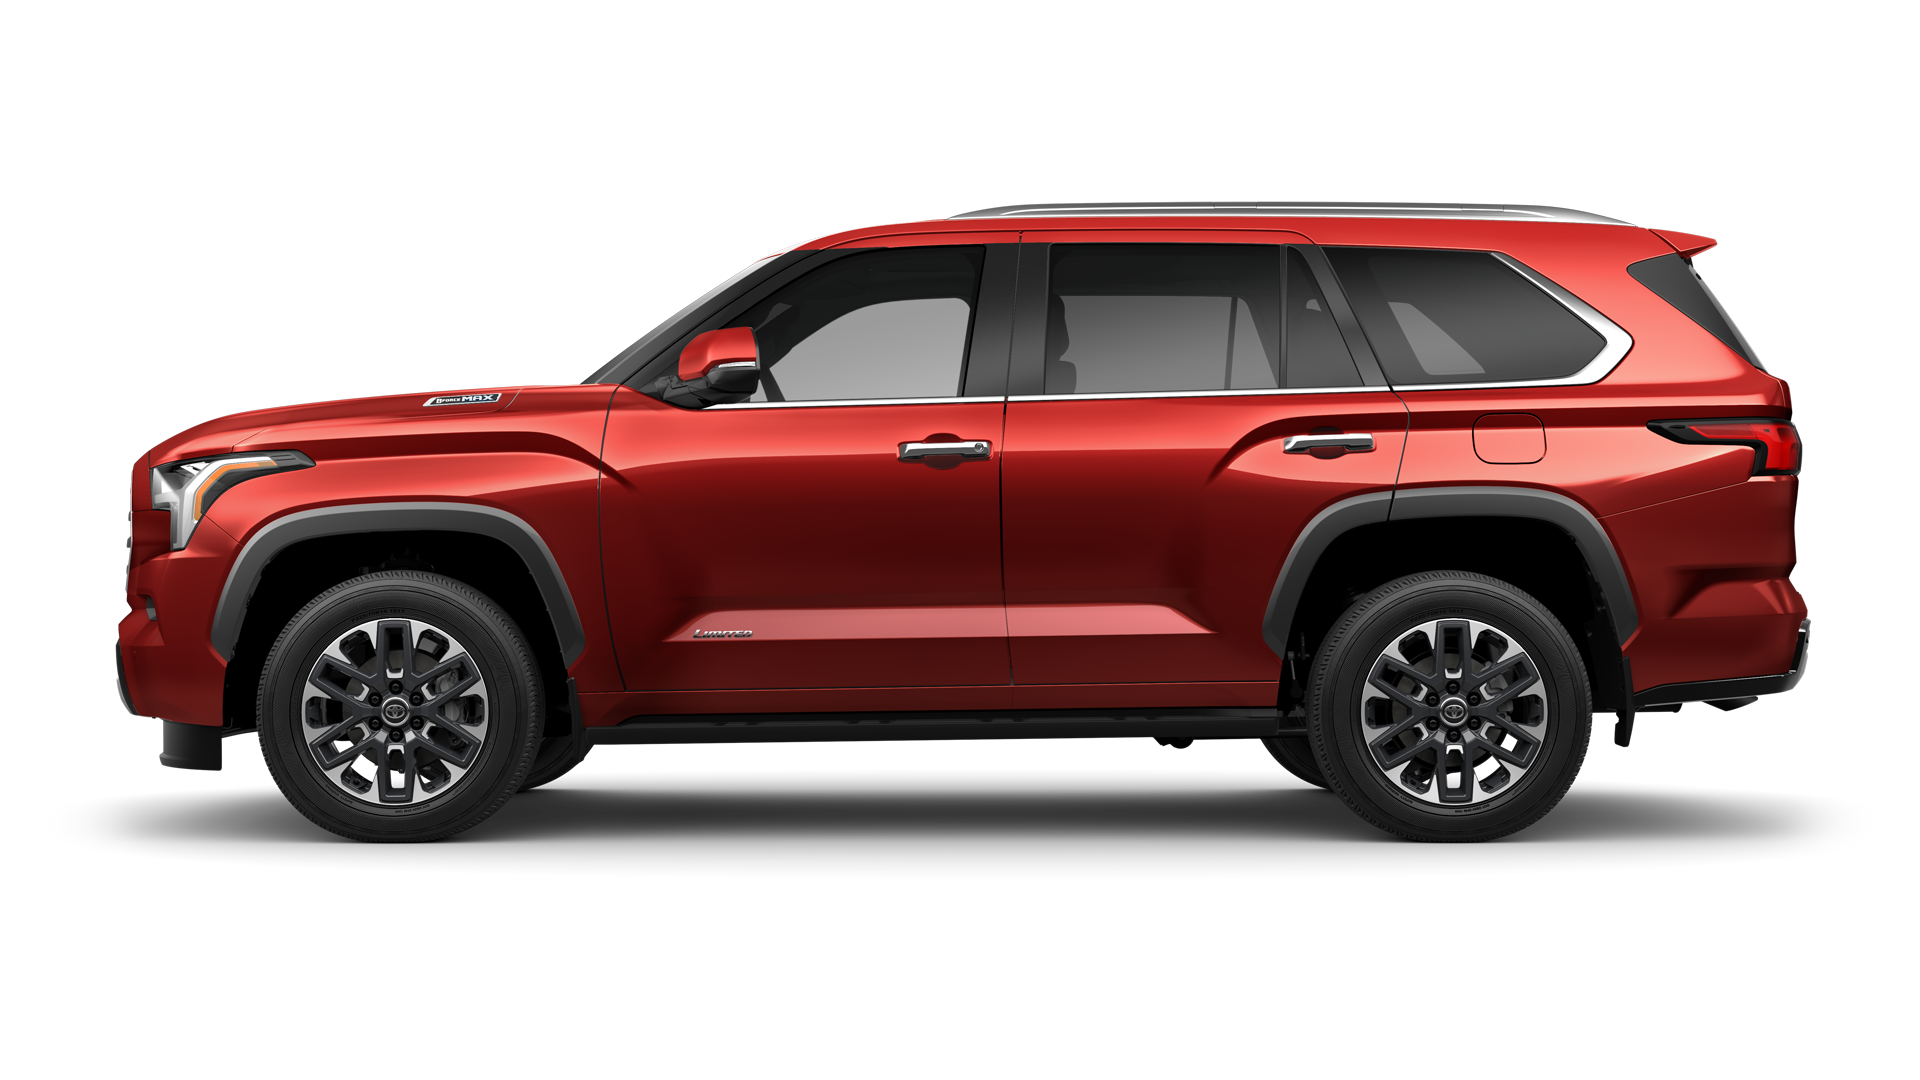 2024 Toyota Sequoia in Supersonic Red*.